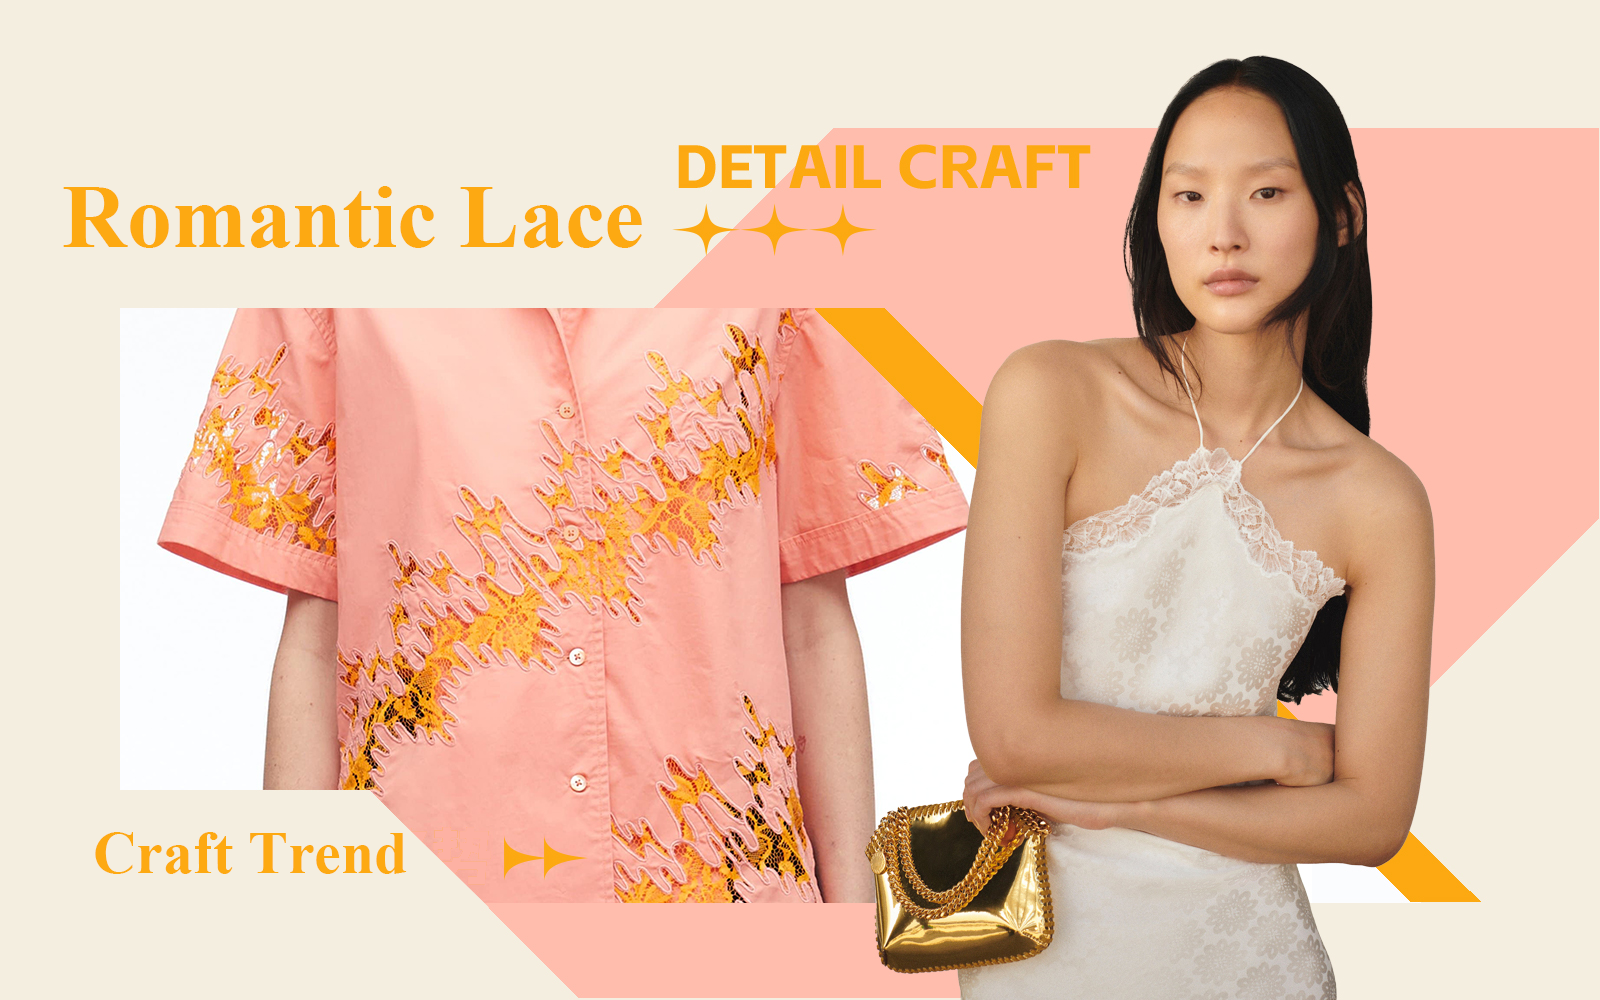 The Craft Trend for Lace Womenswear